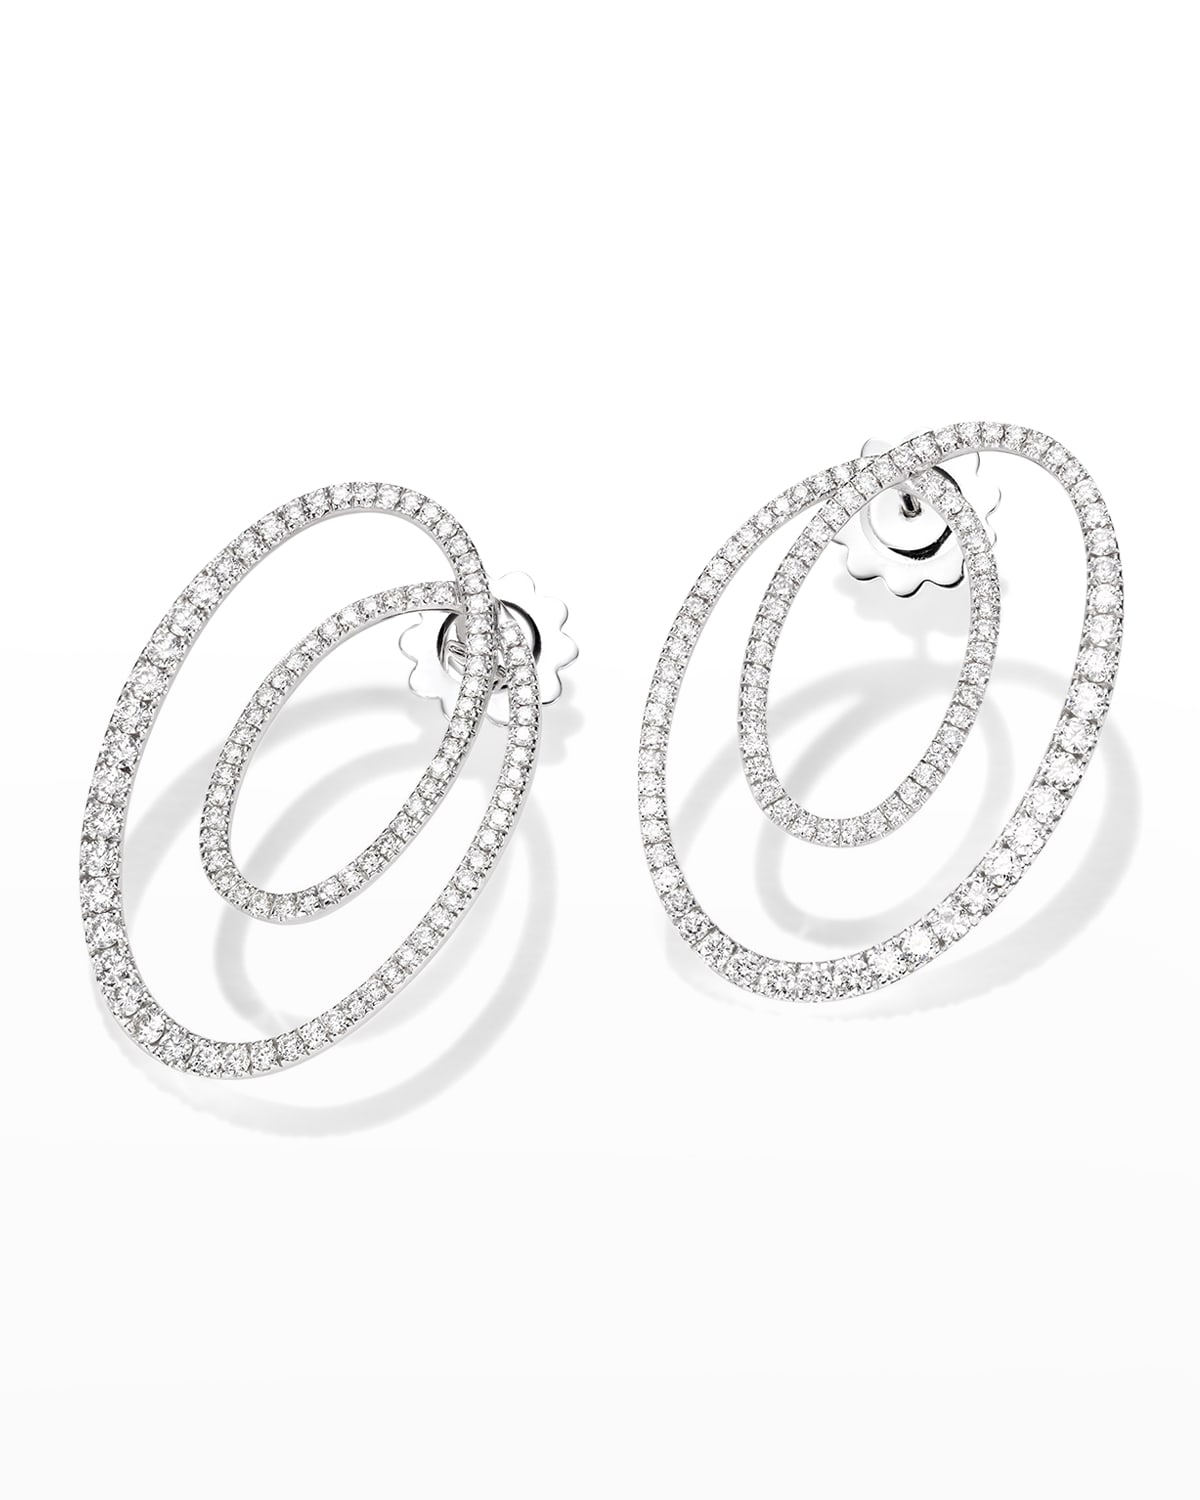 Mattioli Chips Earrings in White Gold and Diamonds